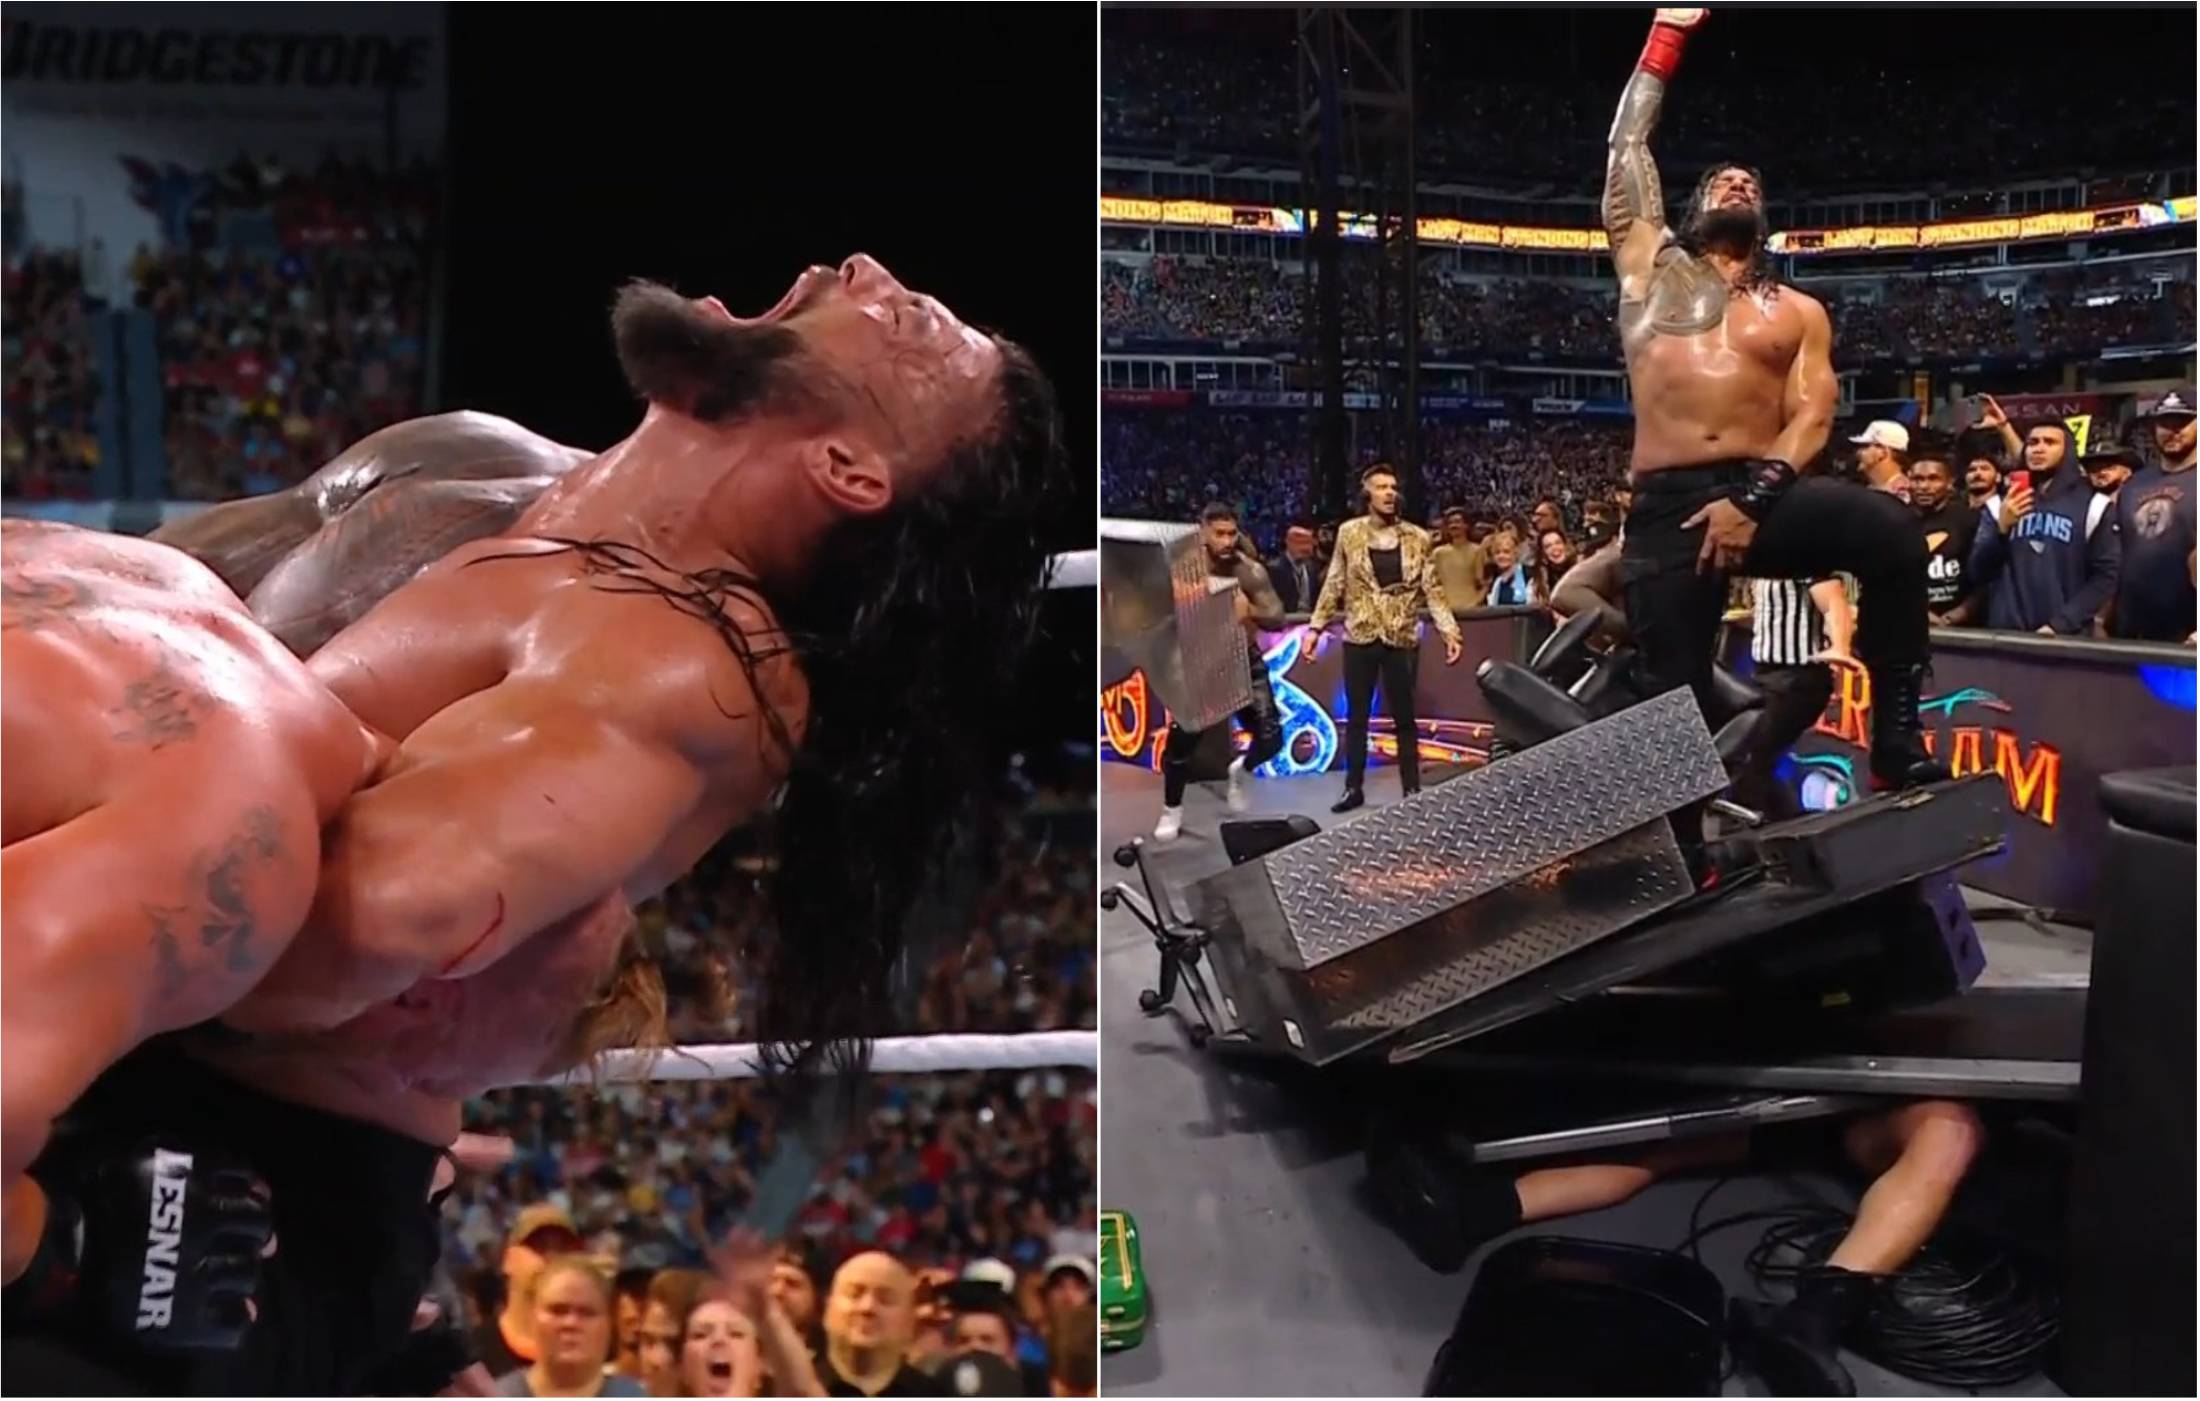 Roman Reigns stole the show at WWE SummerSlam